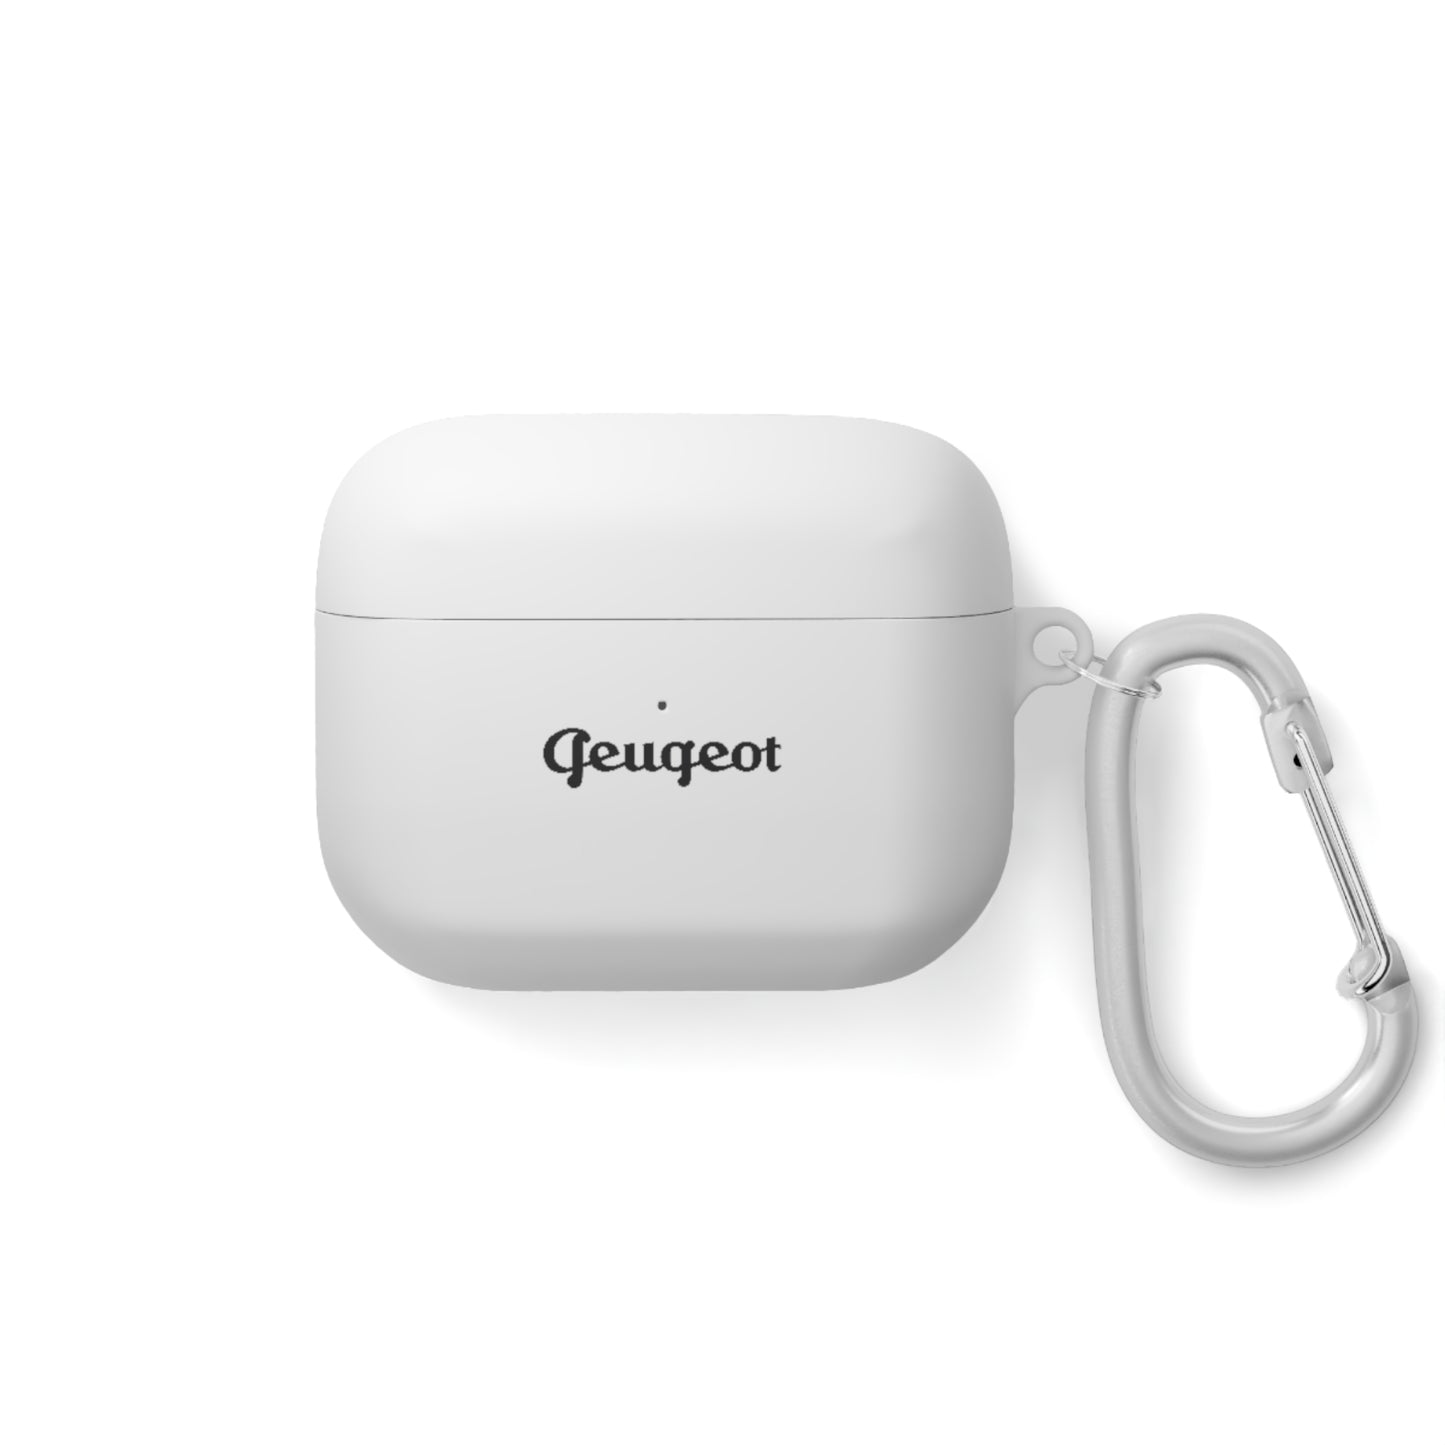 Peugeot AirPods and AirPods Pro Case Cover